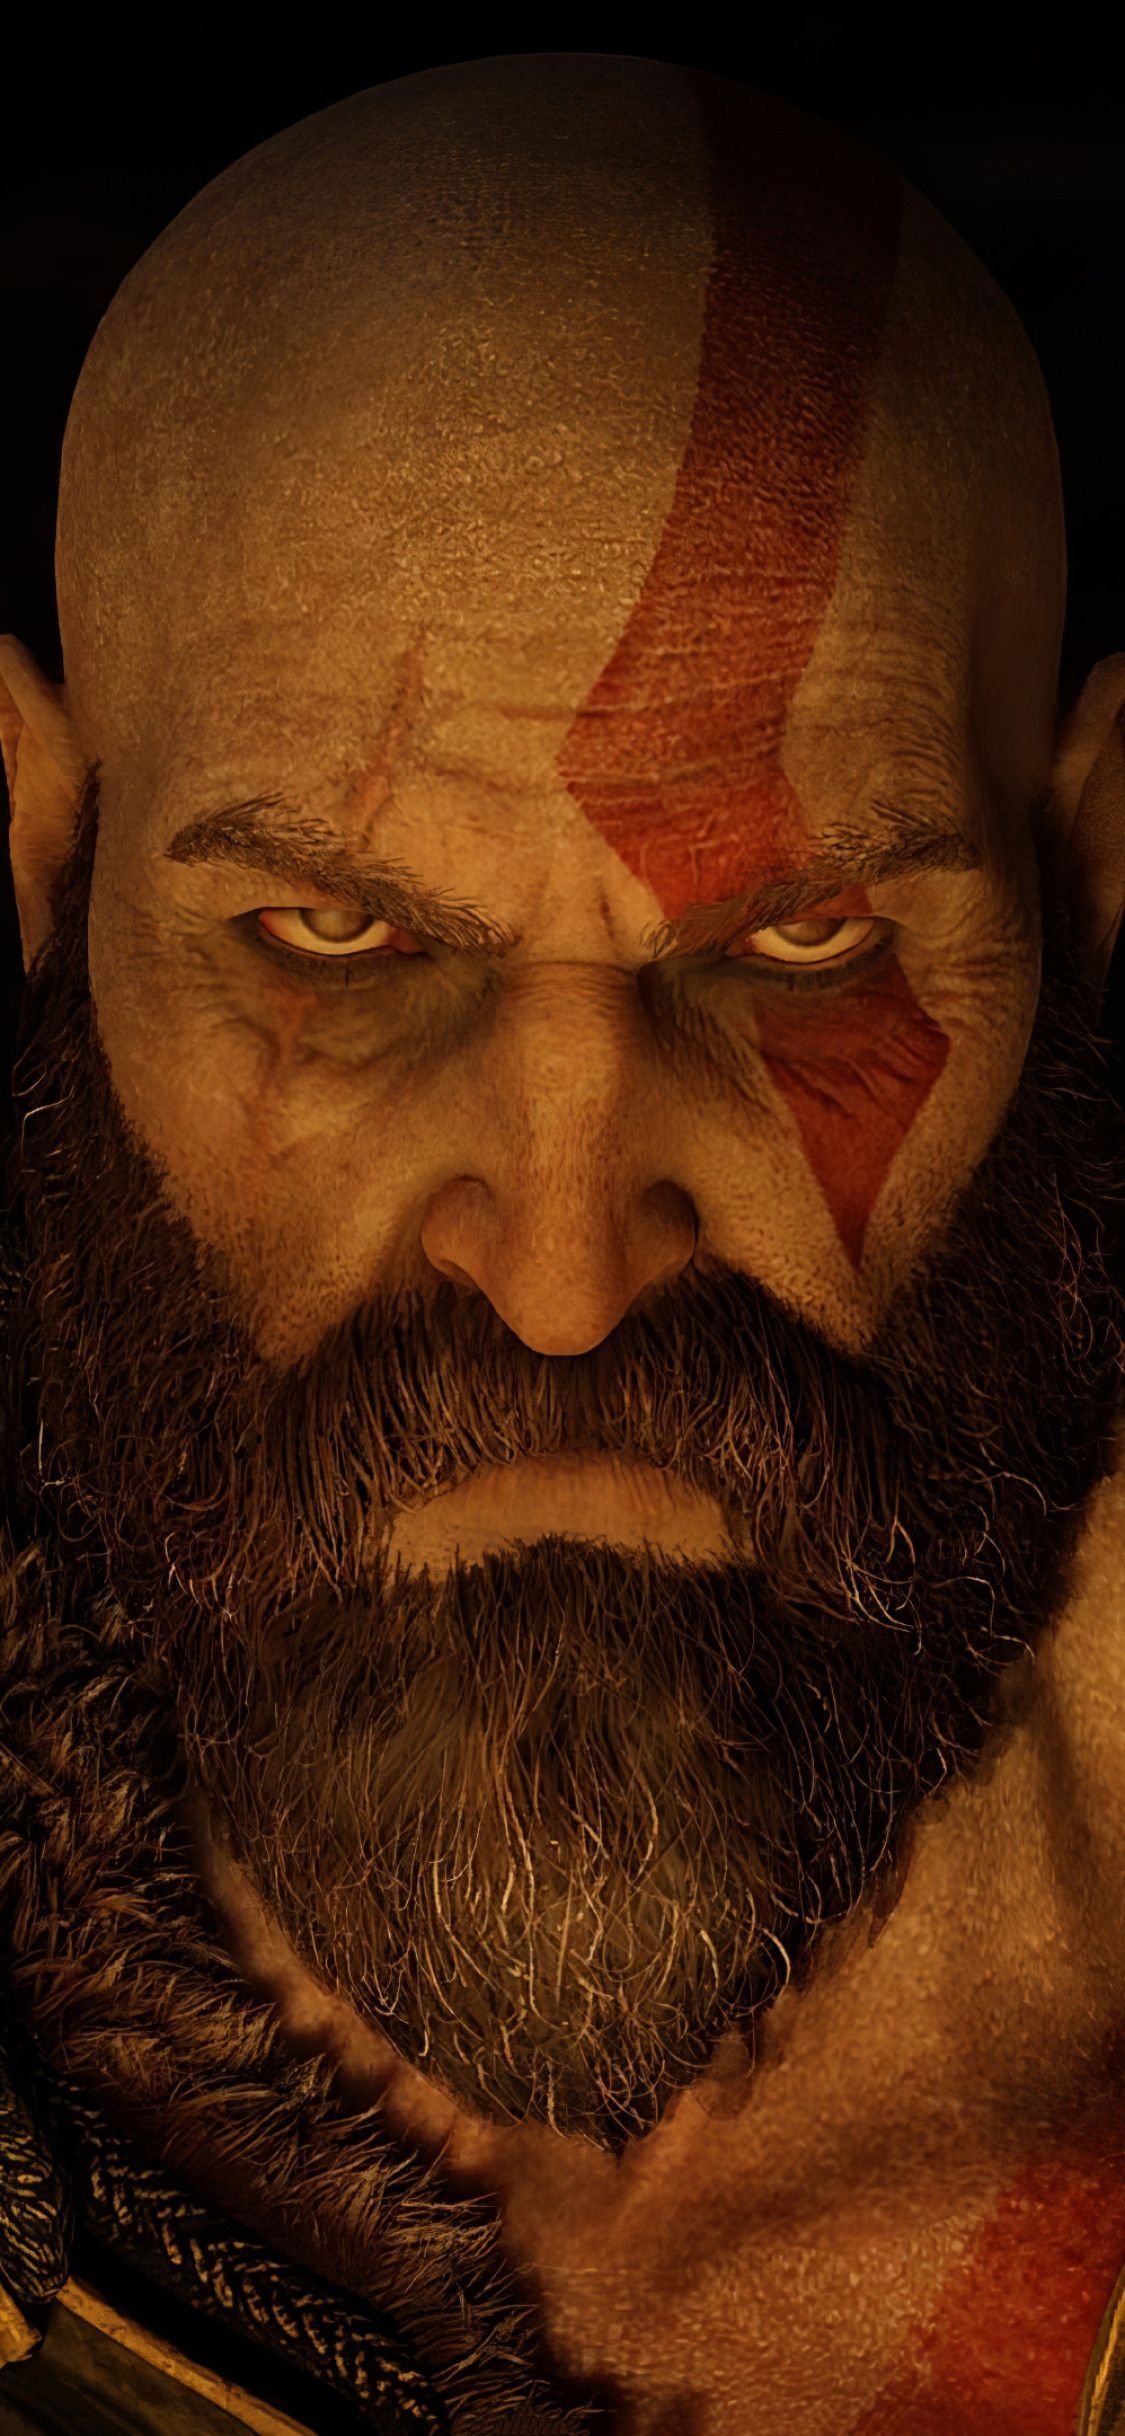 Kratos Angry Eyes God Of War 4 iPhone XS, iPhone iPhone X HD 4k Wallpaper, Image, Background, Photo and. Kratos god of war, God of war, Angry eyes